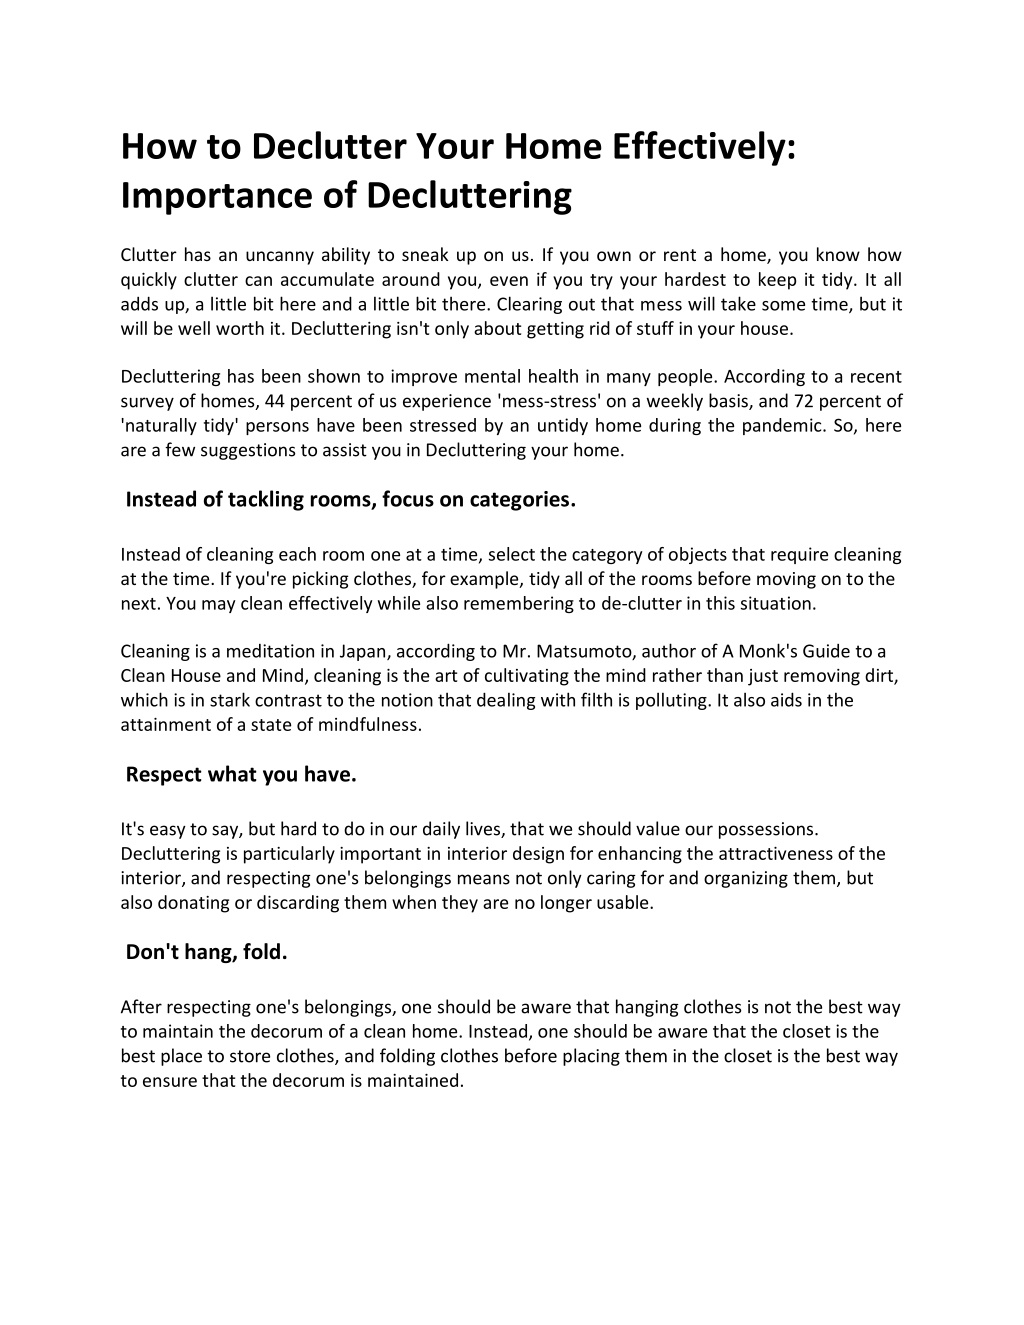 https://image6.slideserve.com/11535876/how-to-declutter-your-home-effectively-importance-l.jpg